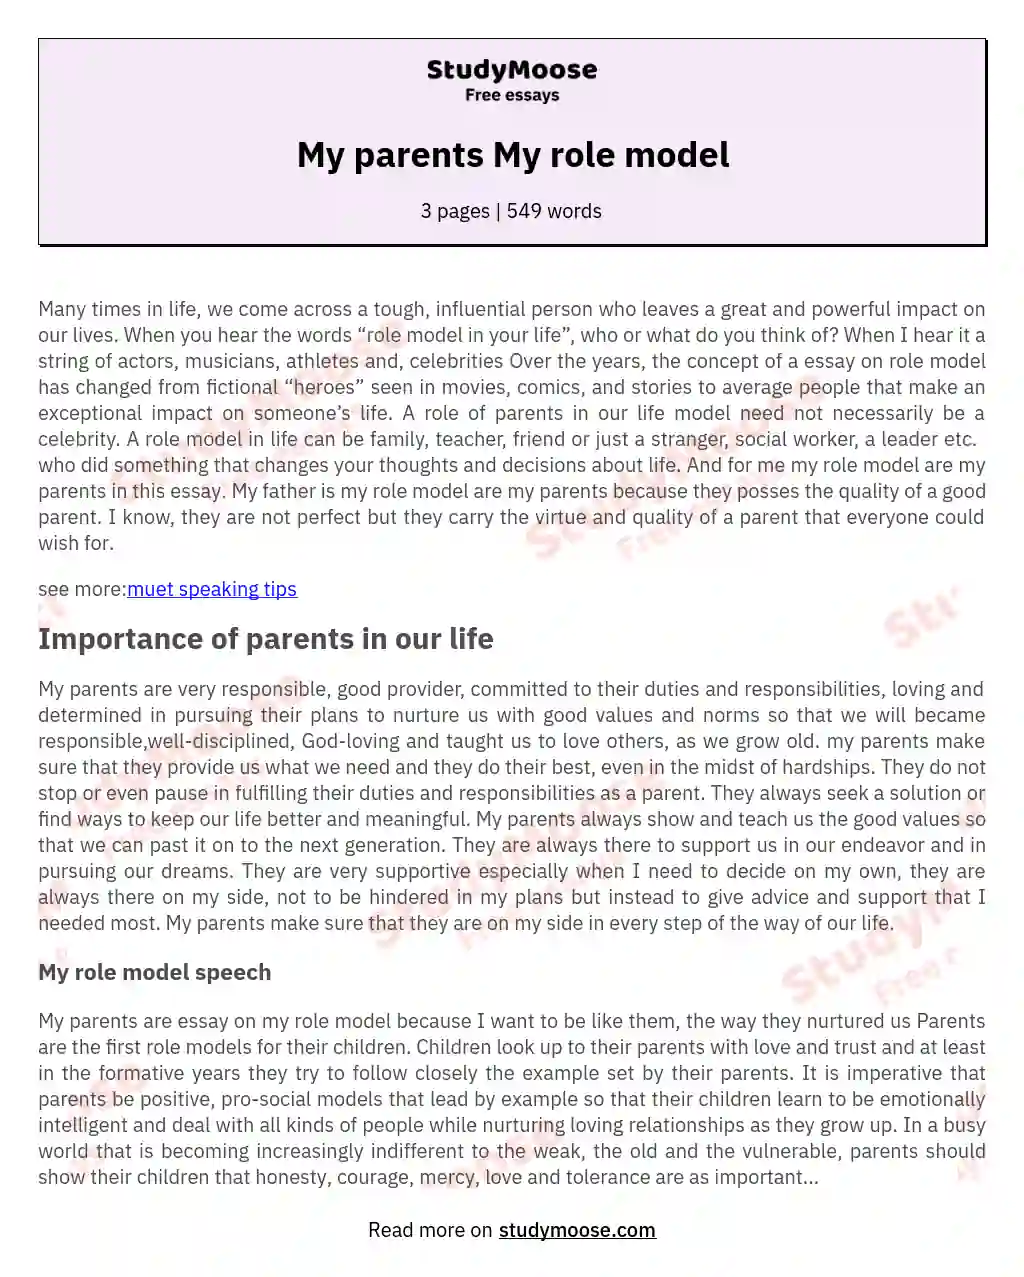 My parents My role model essay